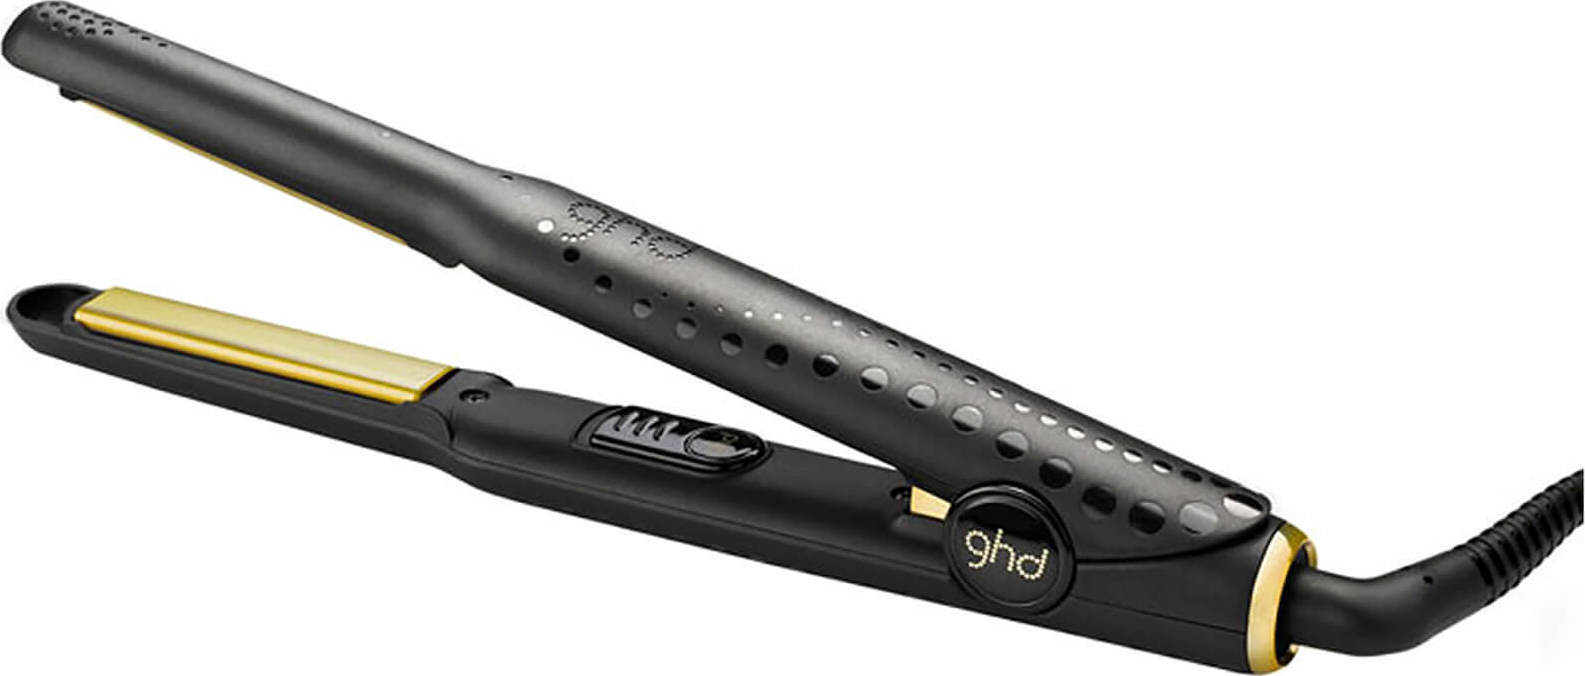 ghd Duet Style hot air styler review  demo on short hair  YouTube